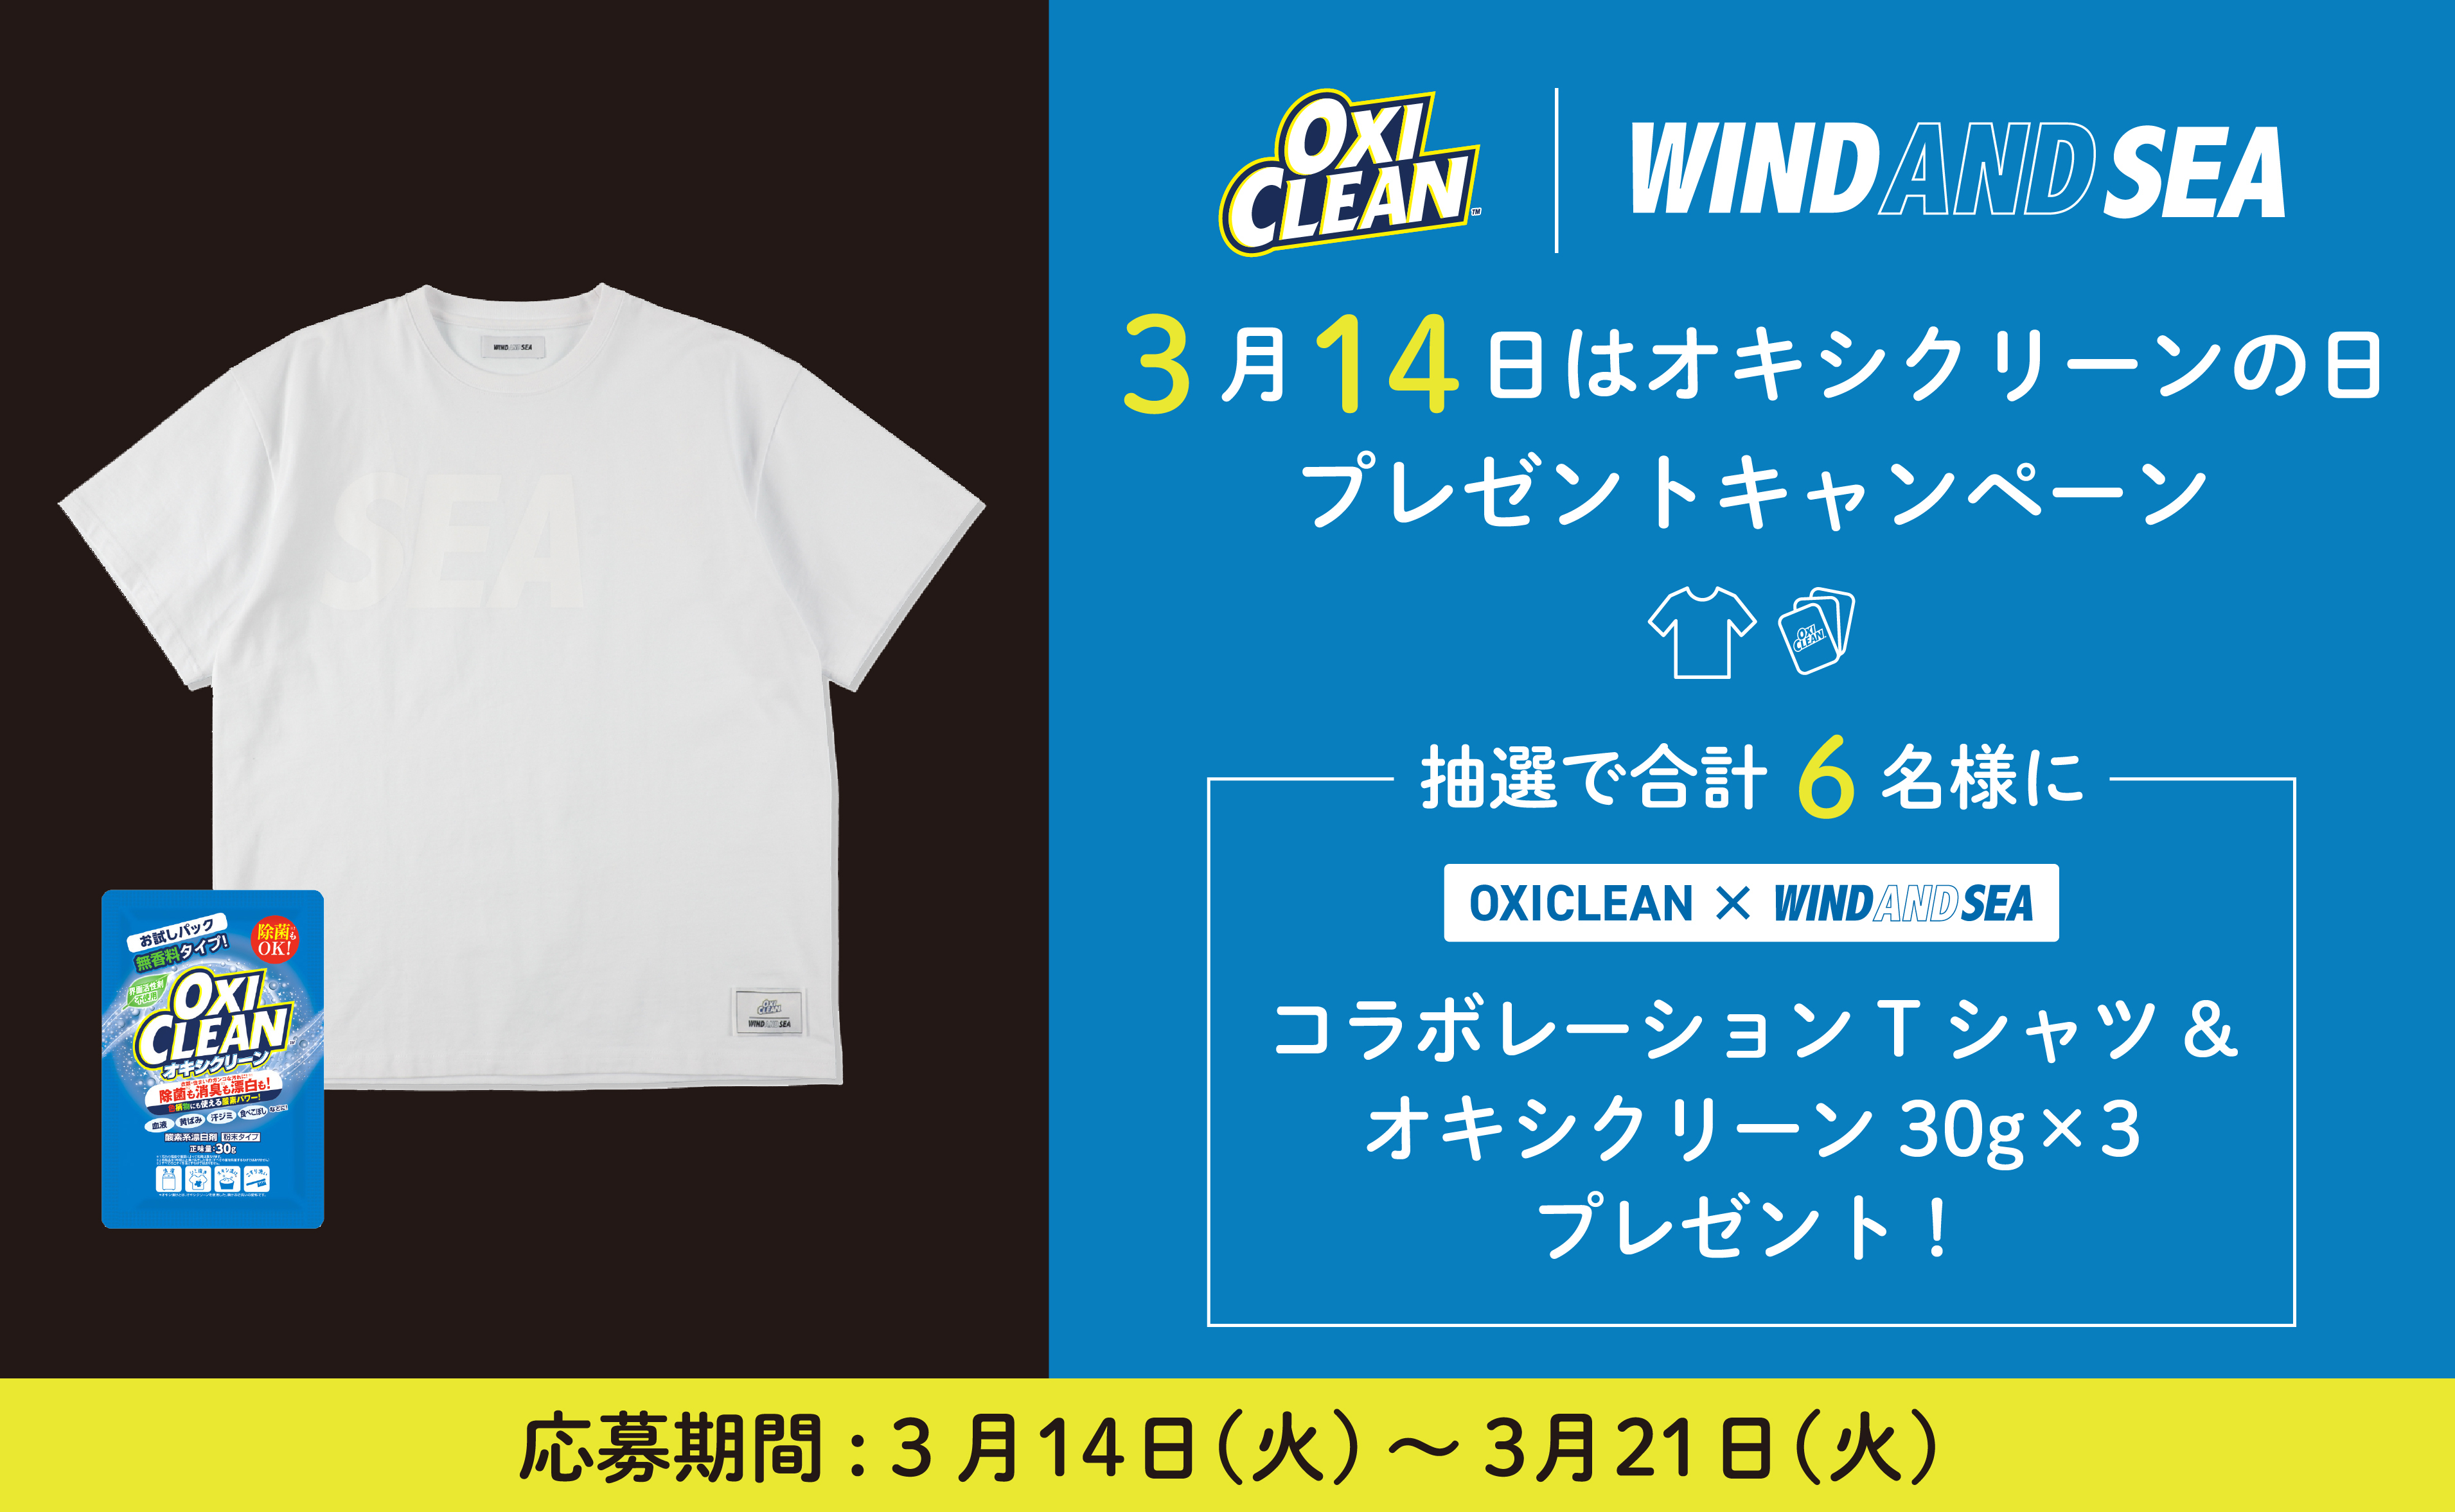 OXICLEAN × WIND AND SEA Tシャツ www.krzysztofbialy.com